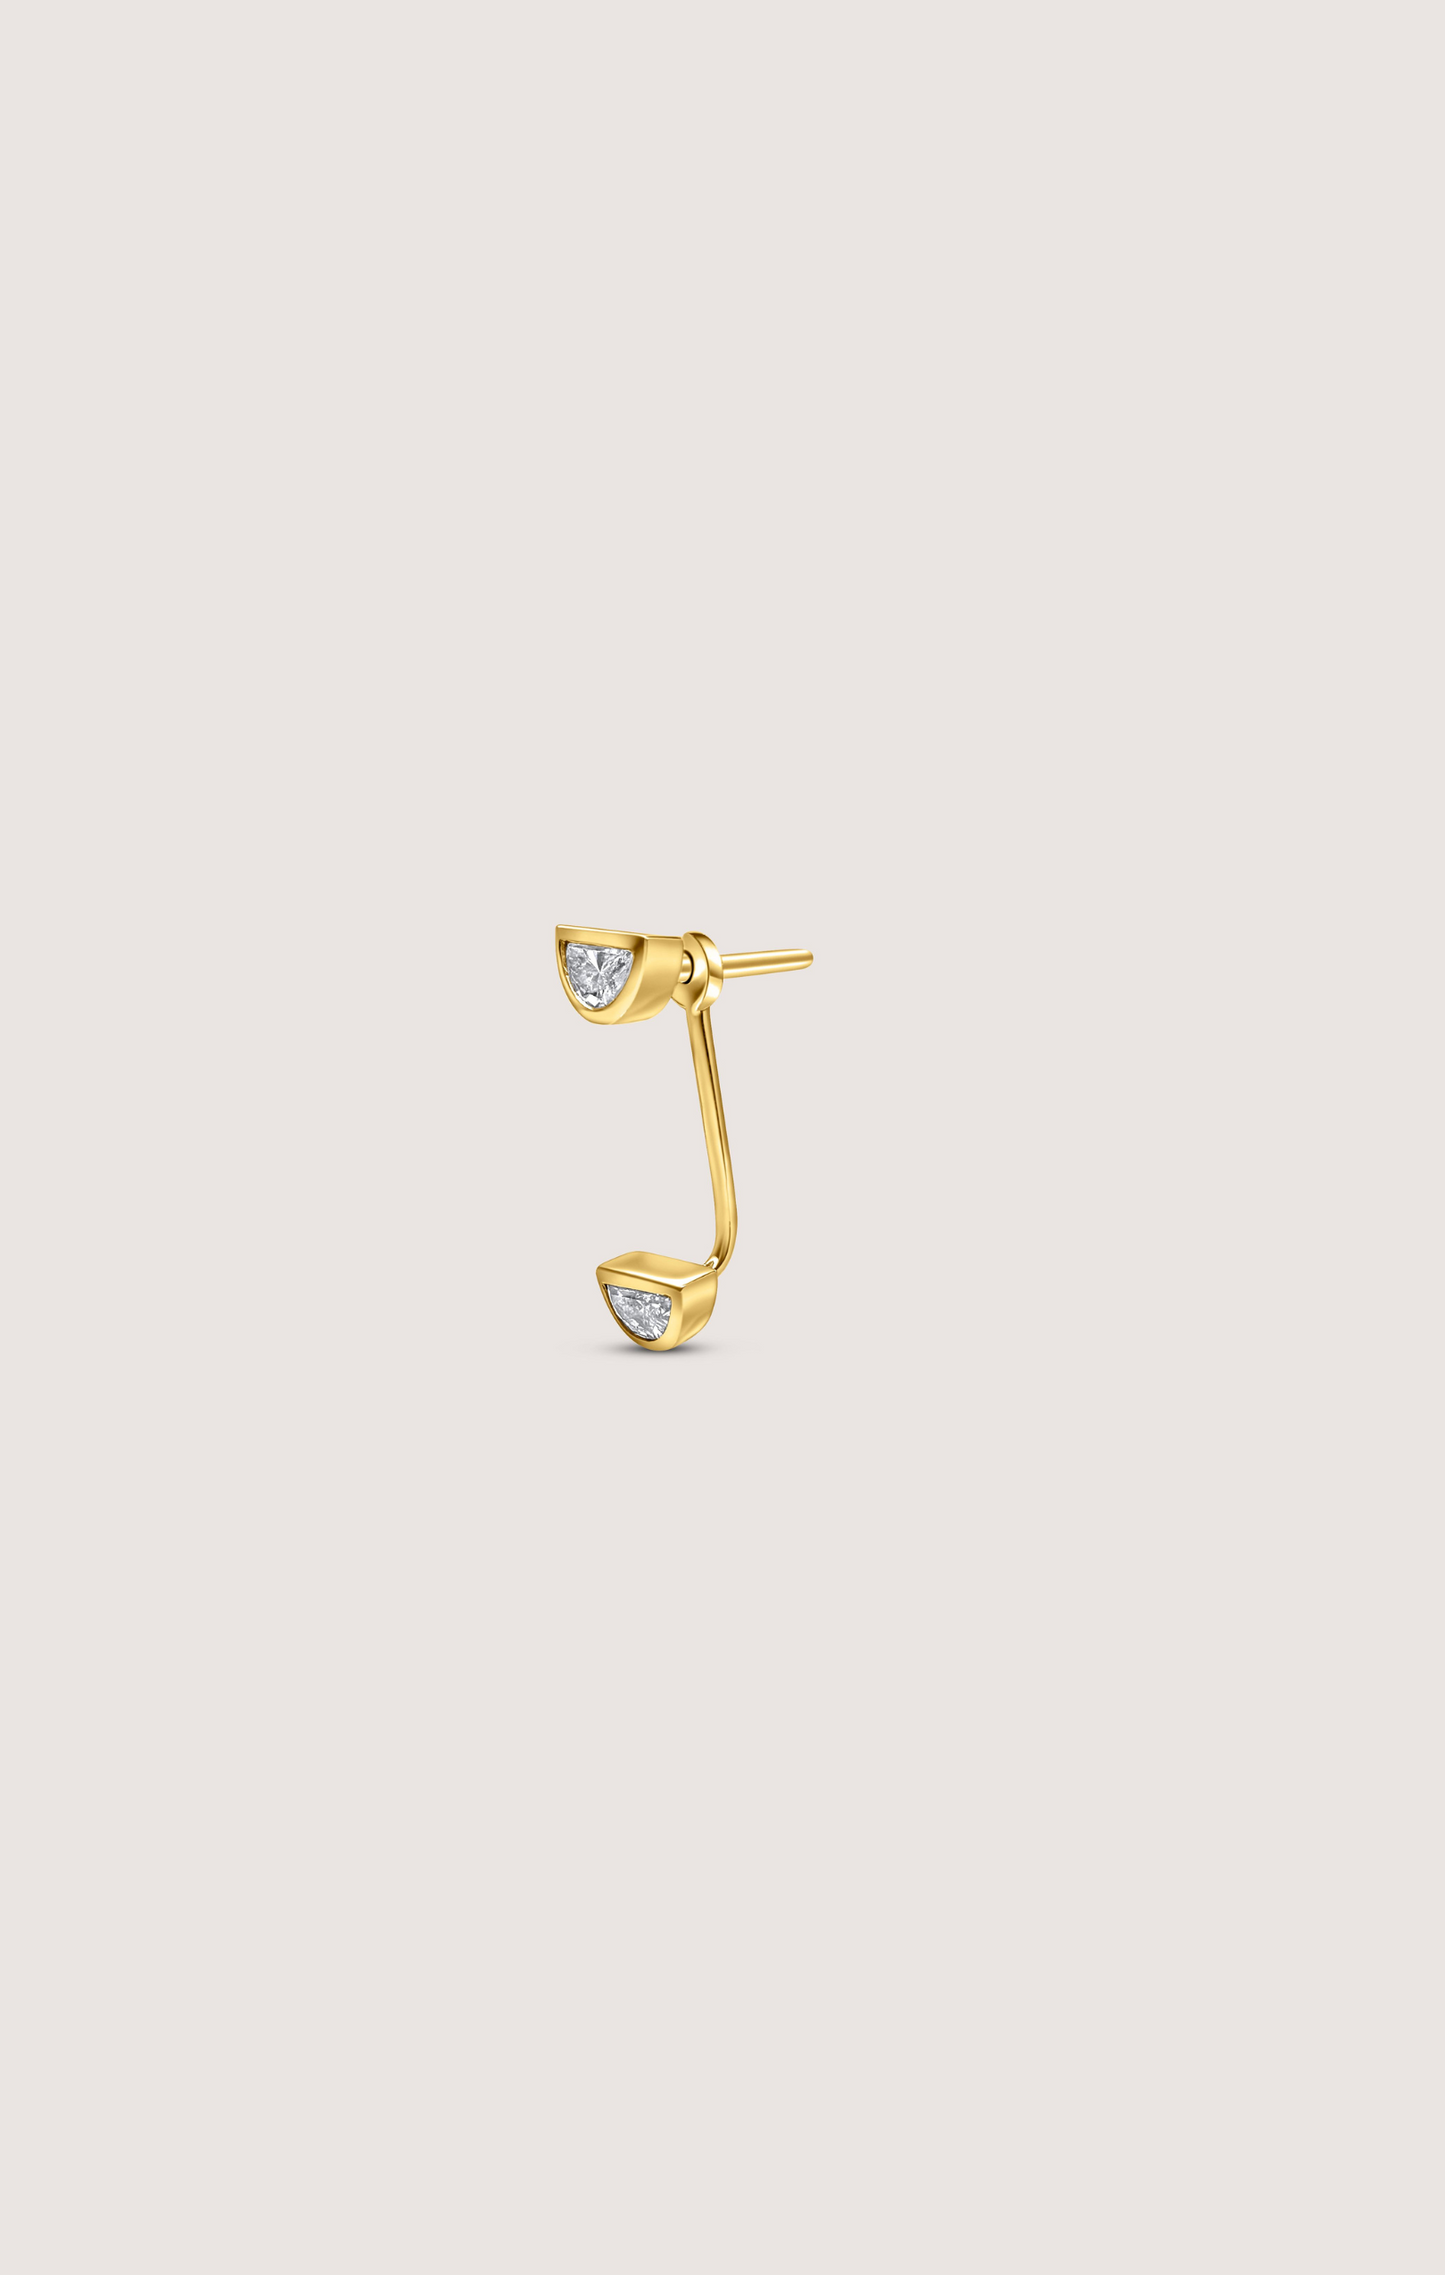 DIAMOND CRESCENT MOON STUD W/REMOVABLE JACKET IN 14K YELLOW GOLD